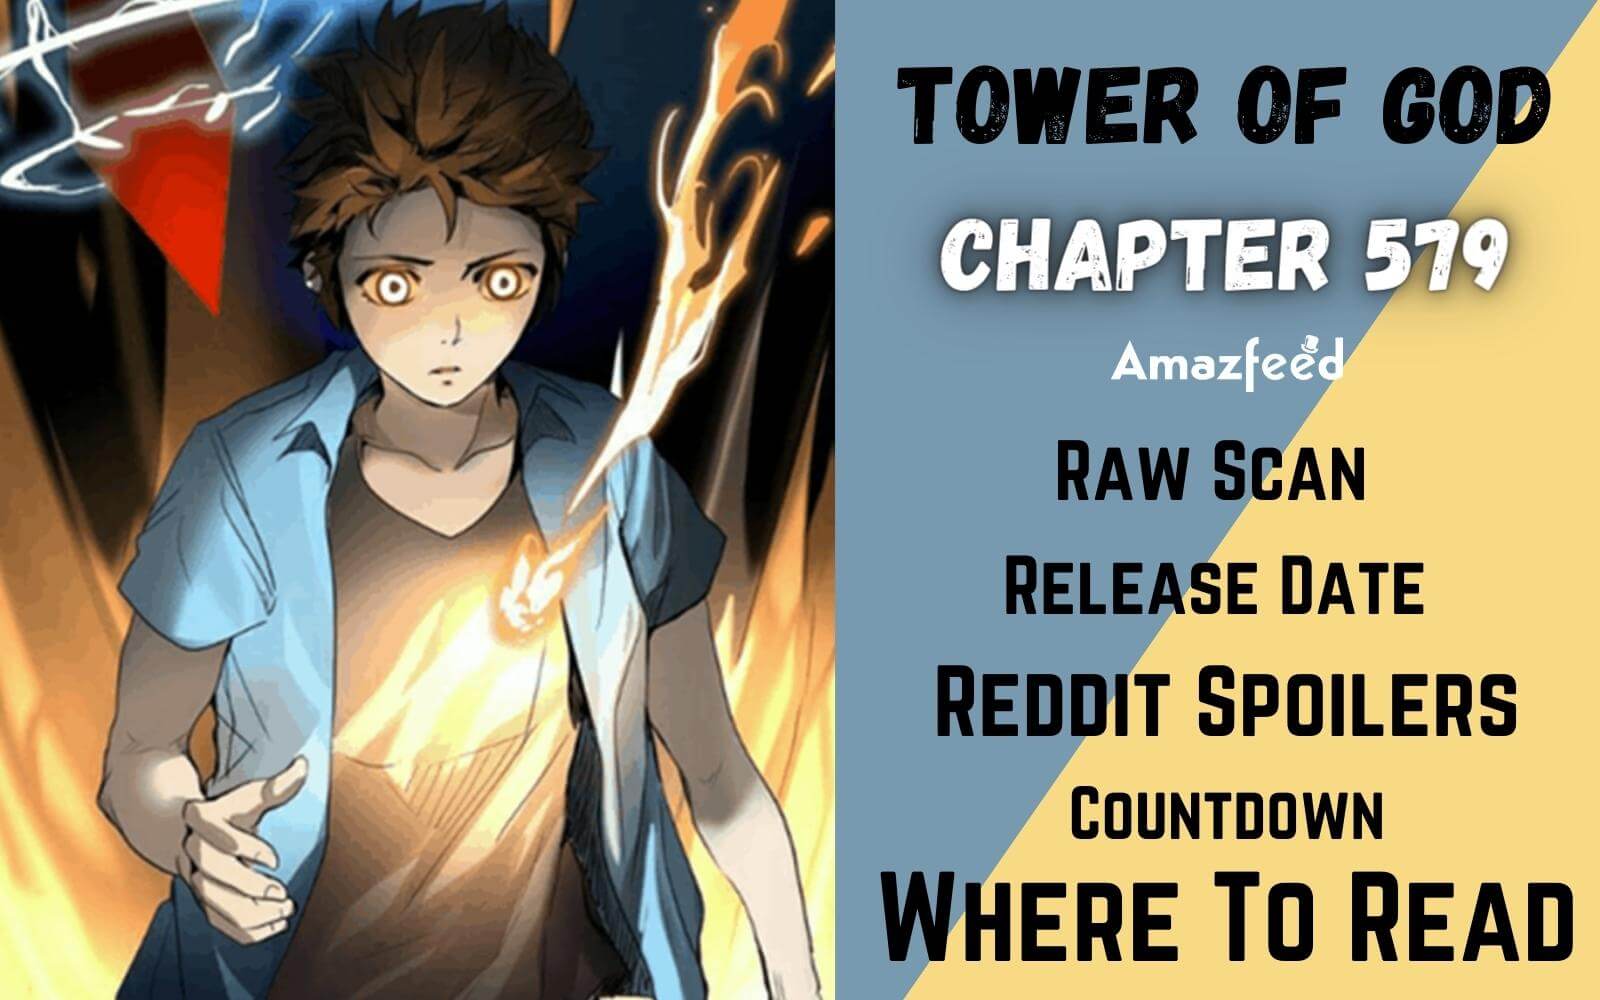 Tower Of God Chapter 579 Tower Of God Chapter 579 Reddit Spoilers, Raw Scan, Release Date, Countdown  & Newest Updates » Amazfeed